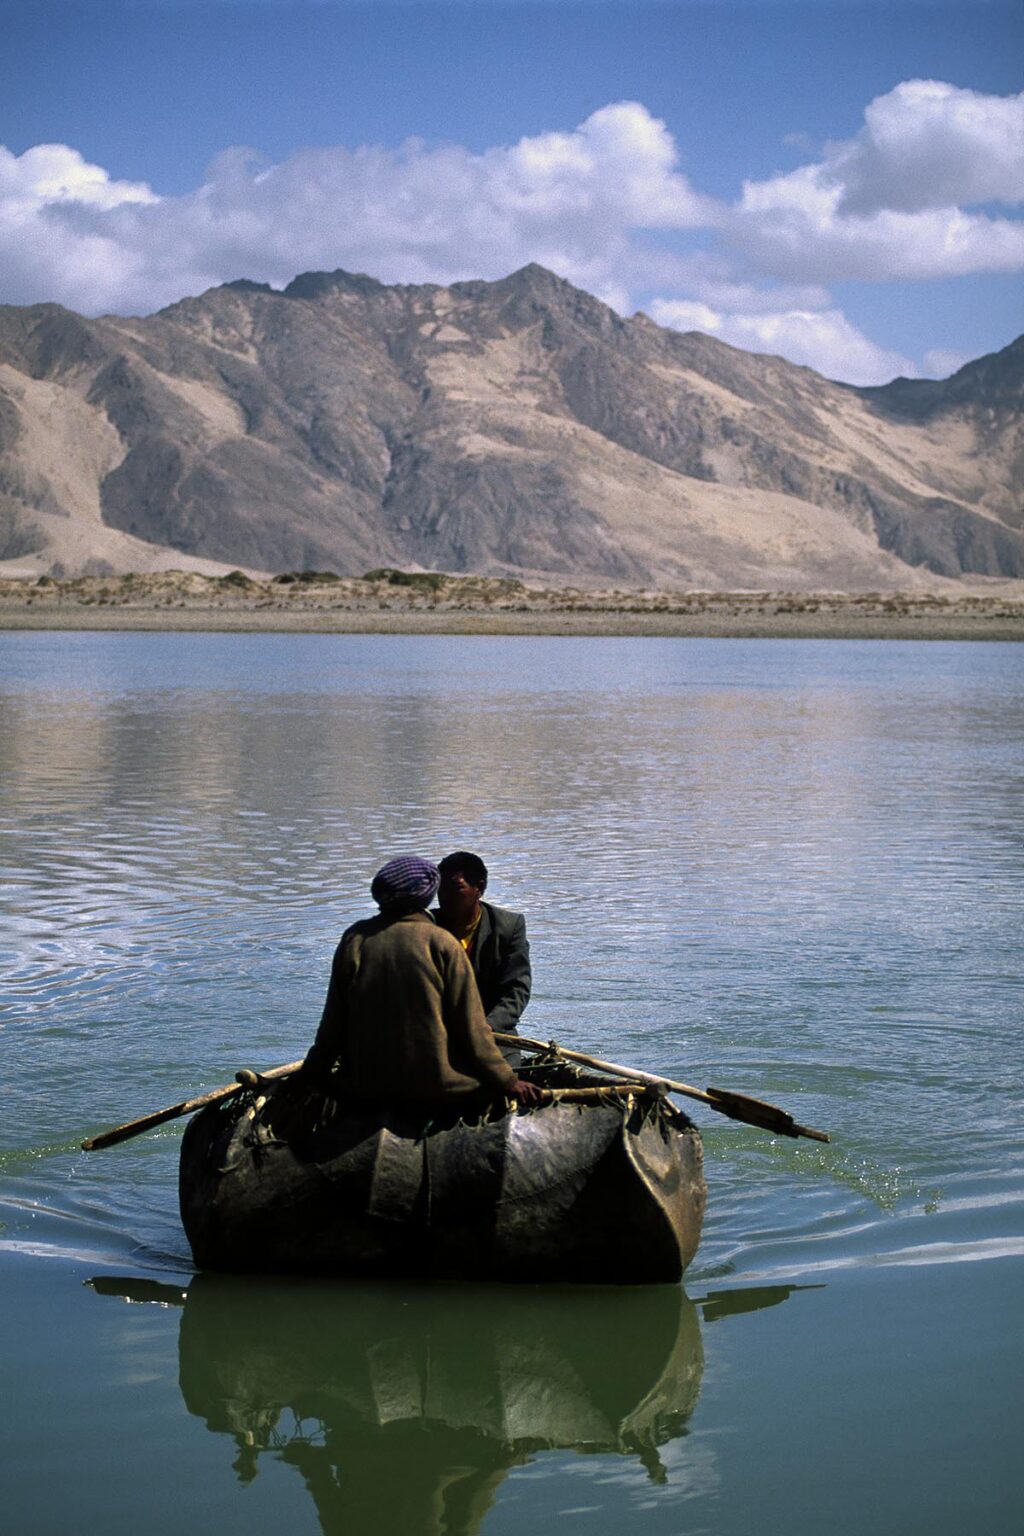 YAK SKIN BOATS are used to cross the YARLUNG TSANGPO or BRAMHAPUTRA RIVER - YARLUNG VALLEY, TIBET